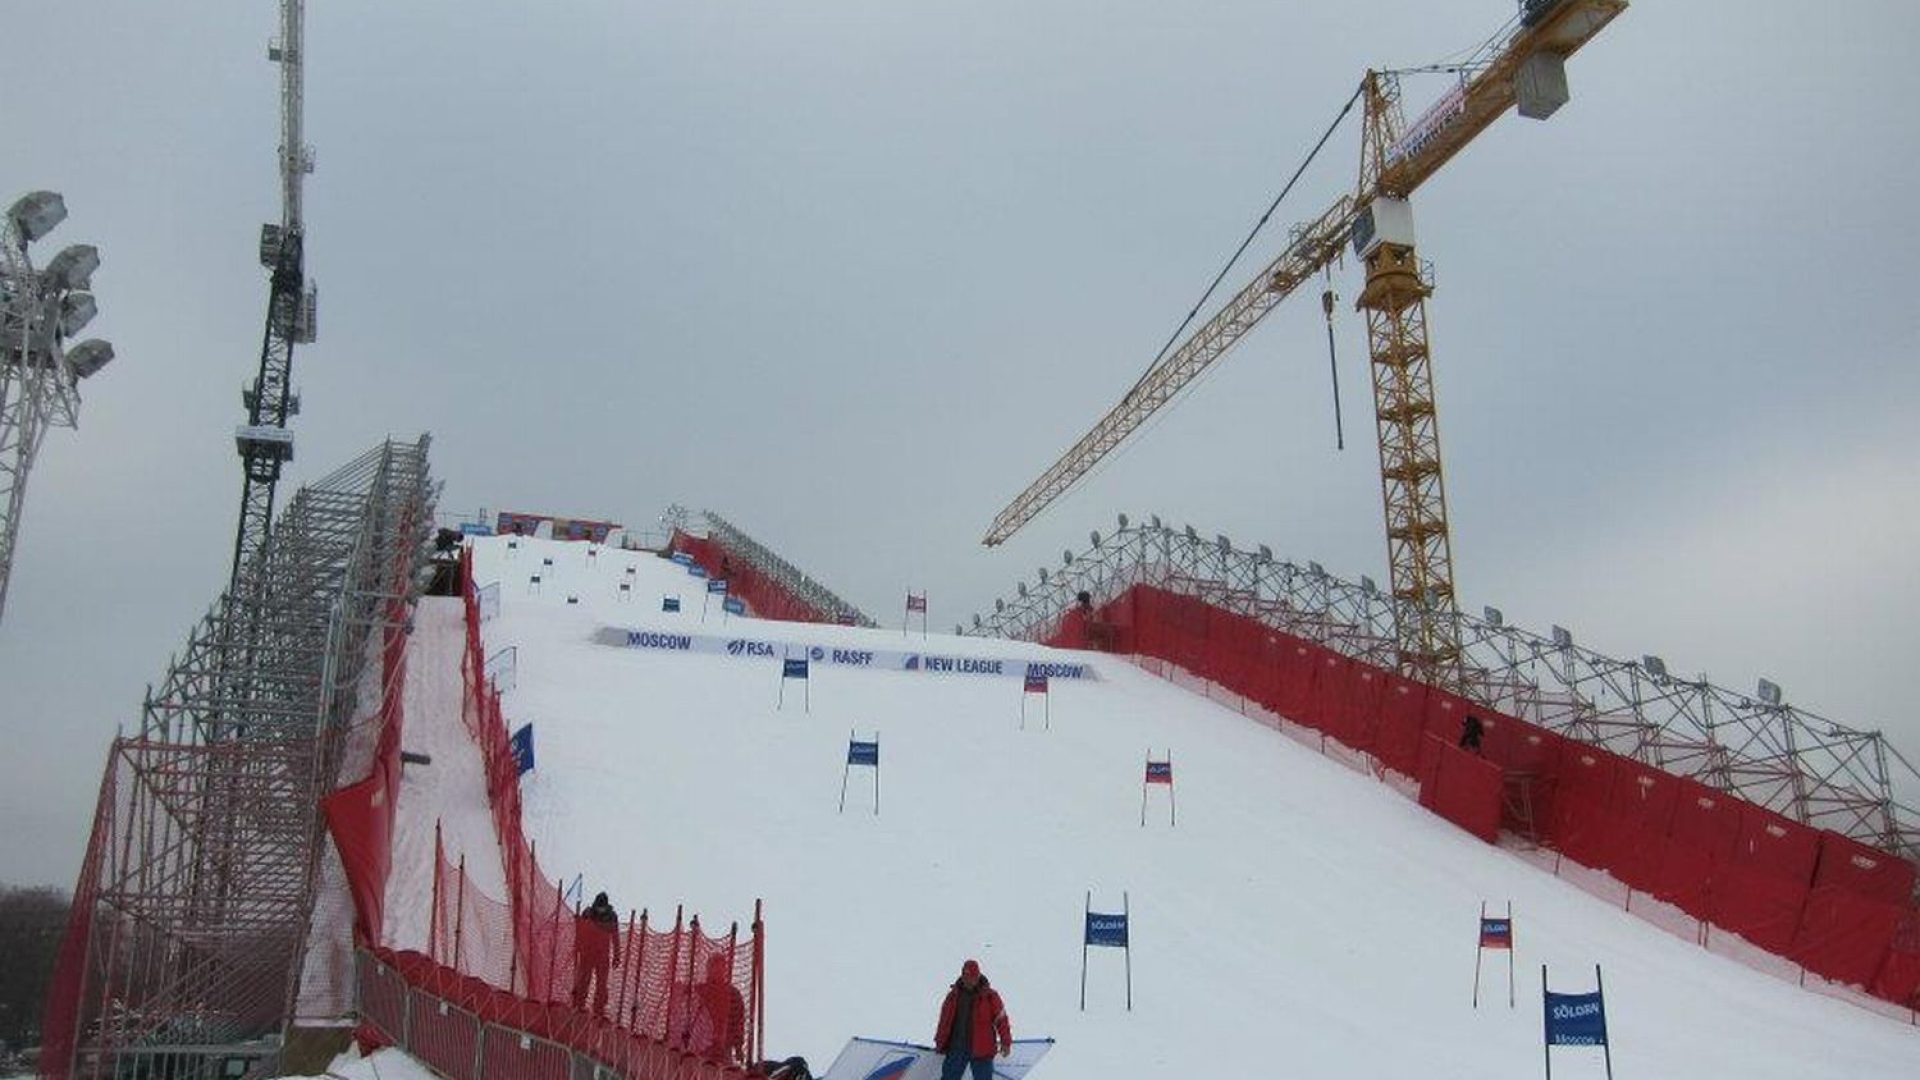 the-ramp-at-the-luzhniki-olympic-complex-for-the-night-parallel-slalom-in-moscow-is-170-feet-high-and-over-535-feet-long-1